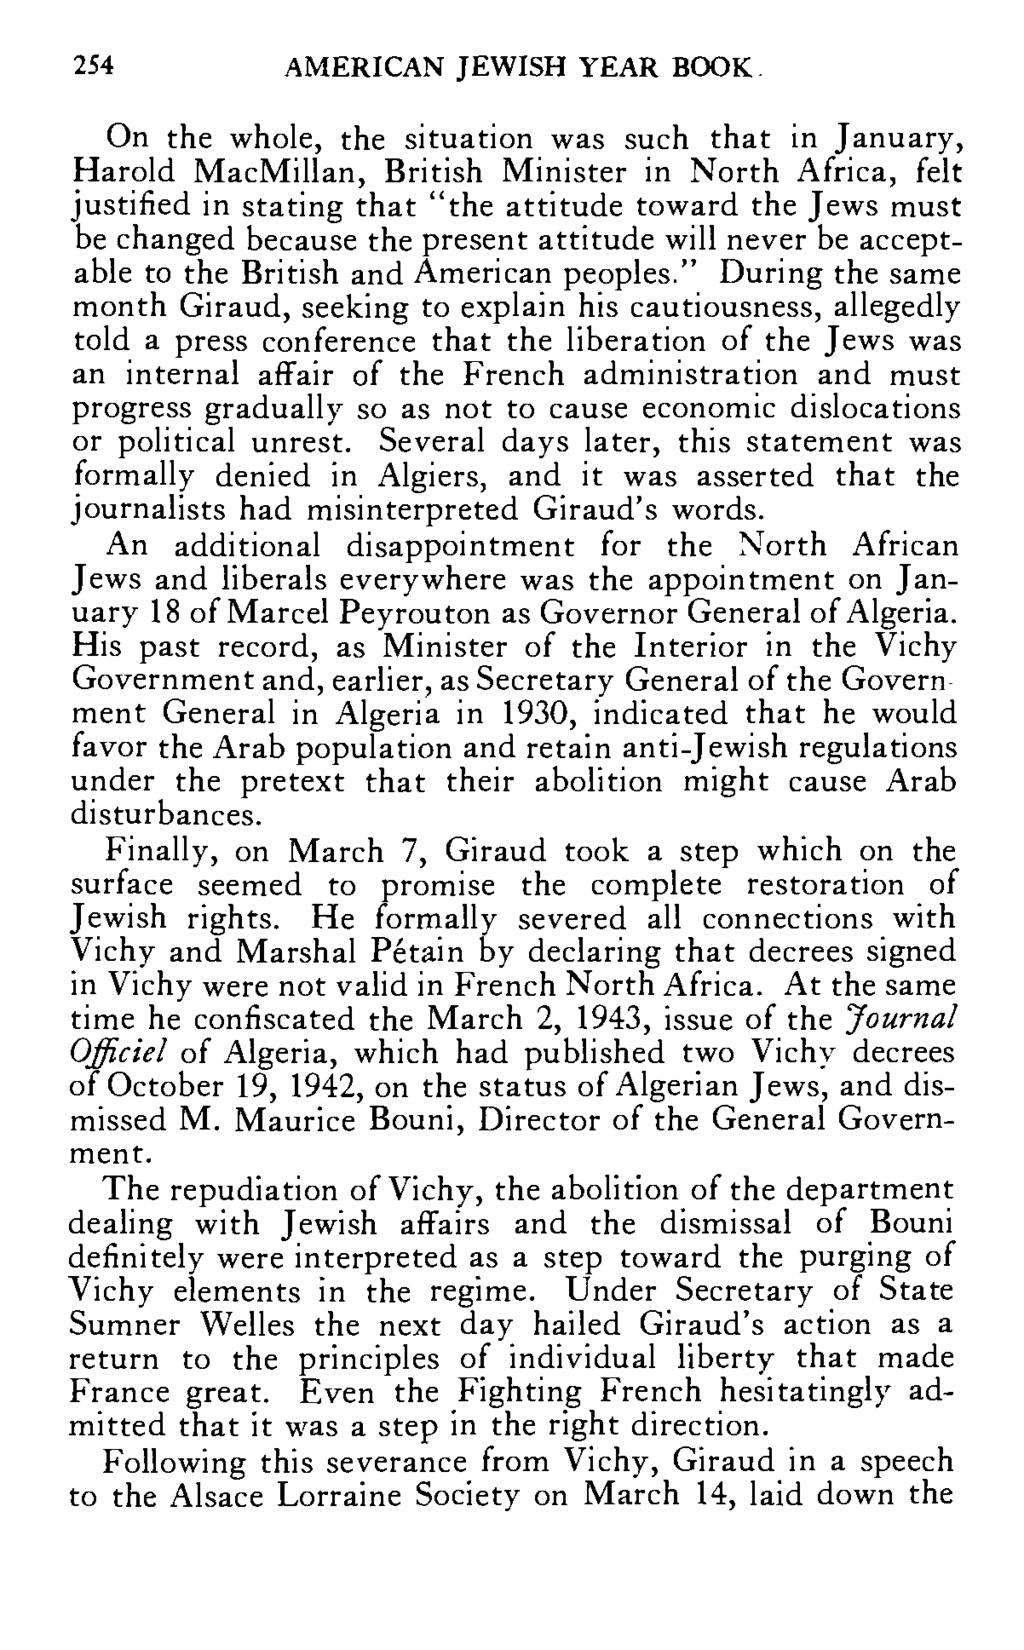 254 AMERICAN JEWISH YEAR BOOK On the whole, the situation was such that in January, Harold MacMillan, British Minister in North Africa, felt justified in stating that "the attitude toward the Jews